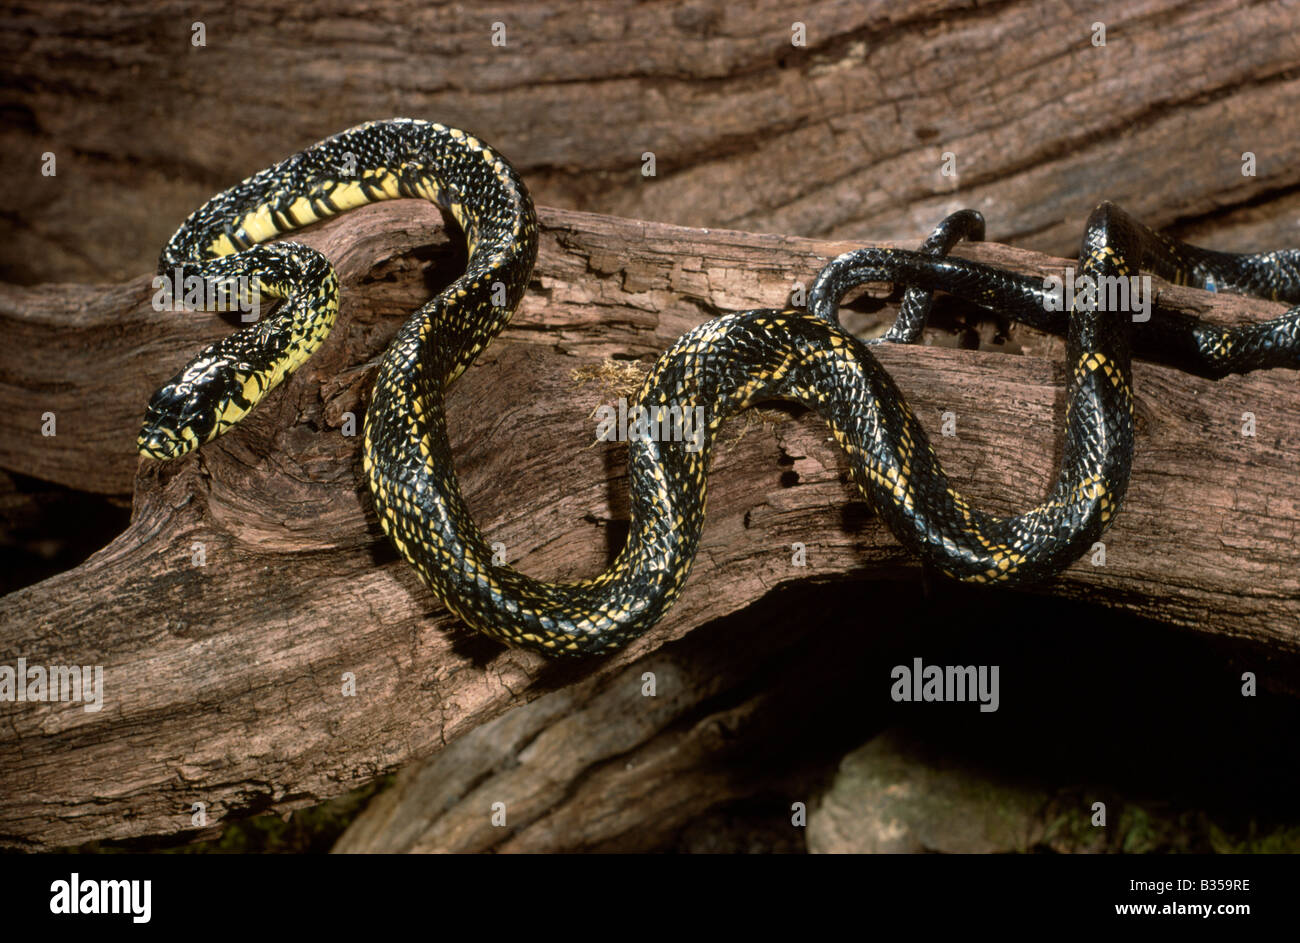 Black and Yellow Ratsnake Spilotes pullates South America Stock Photo